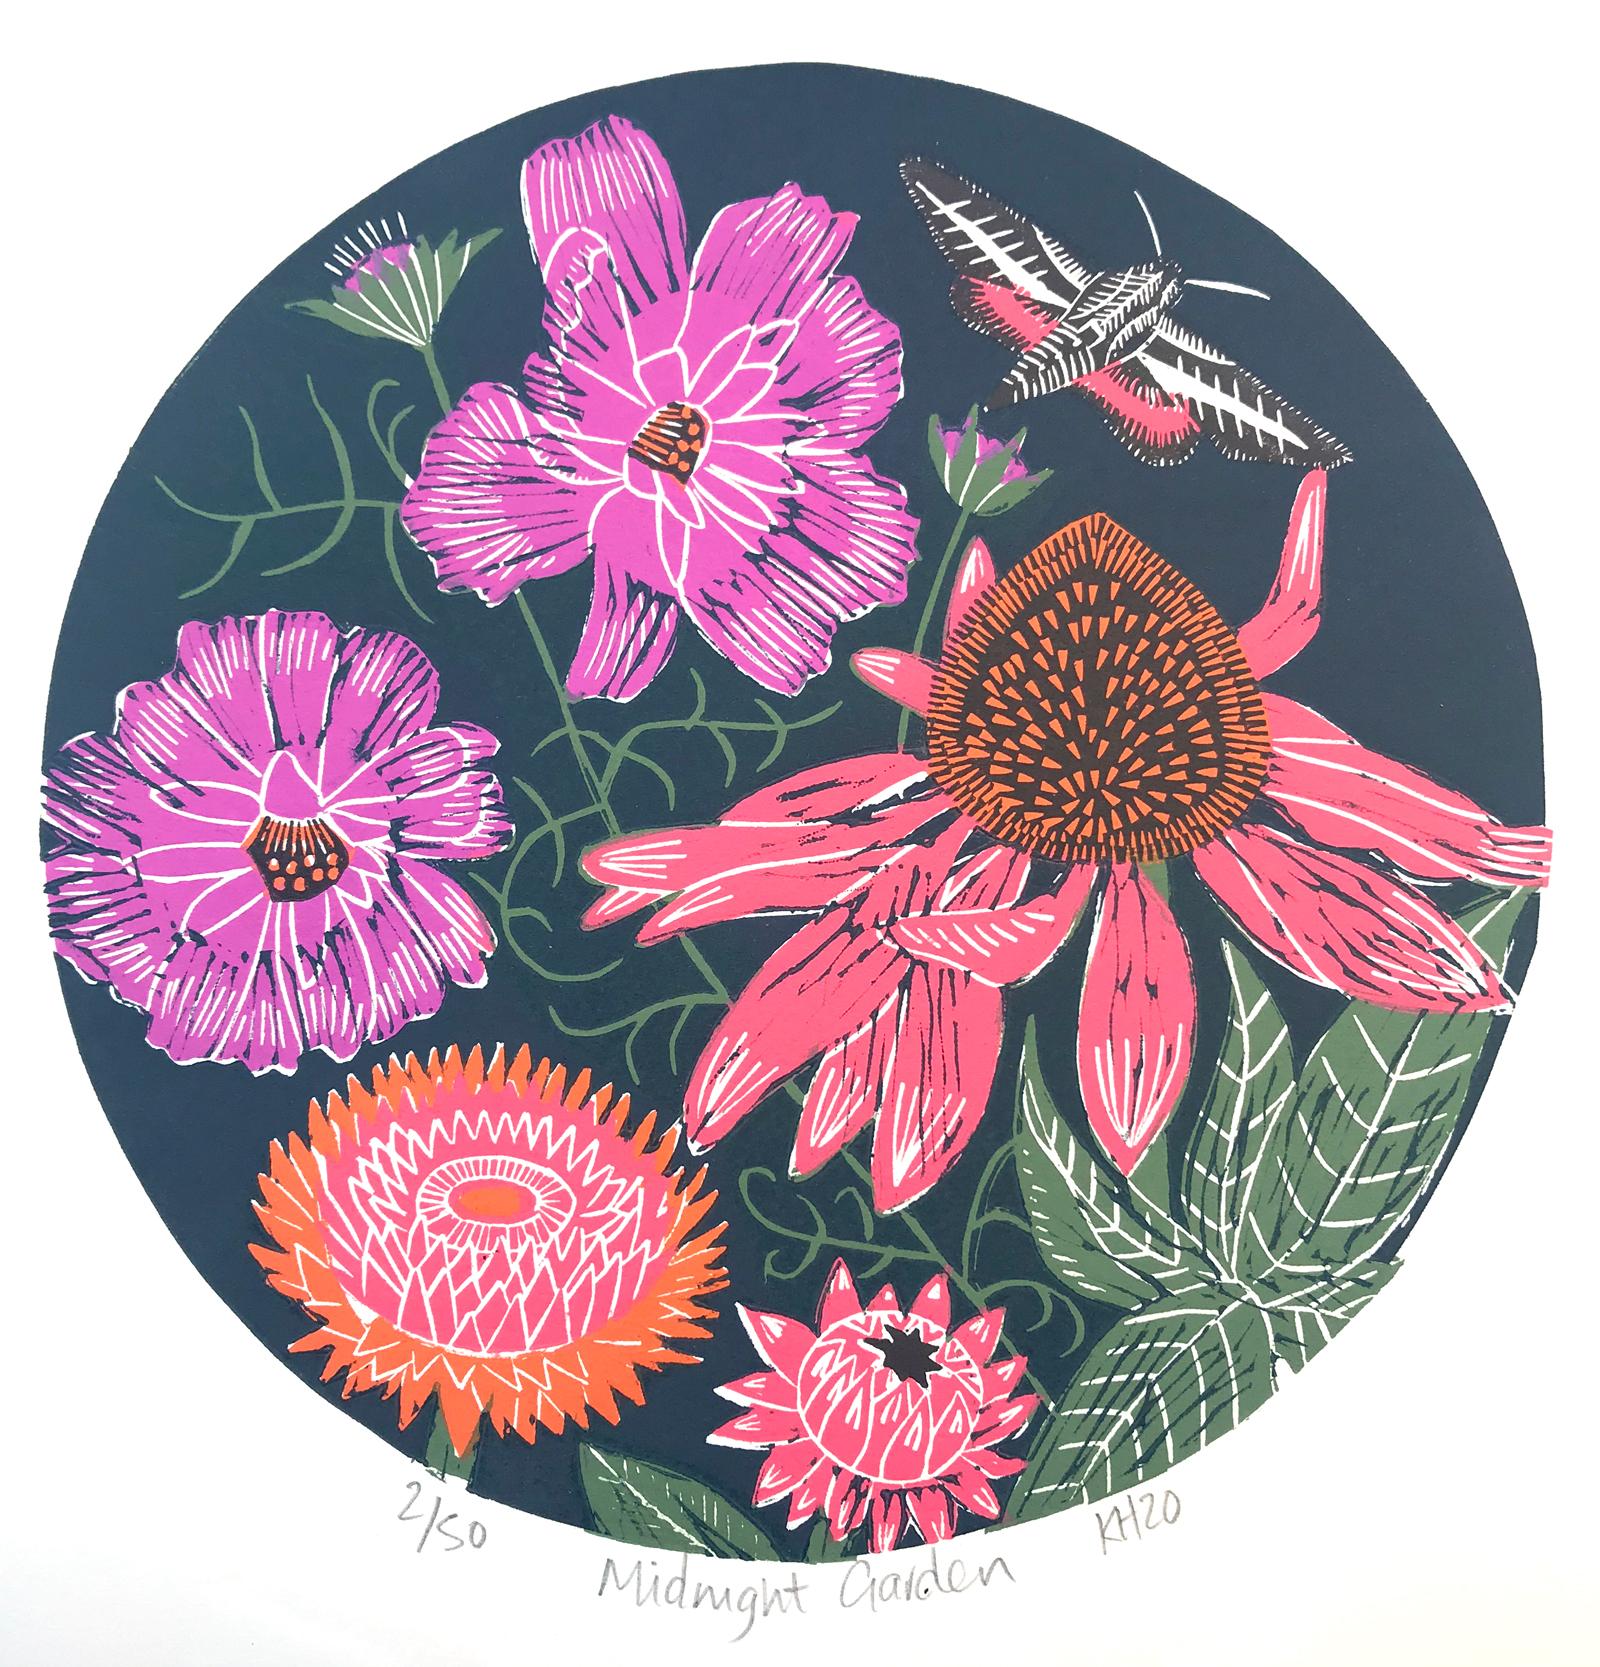 These circular garden prints features a medley of summer dahlias standing proud in the moonlight and a majestic Emperor Moth. The prints are cut from 5 individual Lino blocks. Limited Edition of 50 Linocut Print – A relief printing technique where